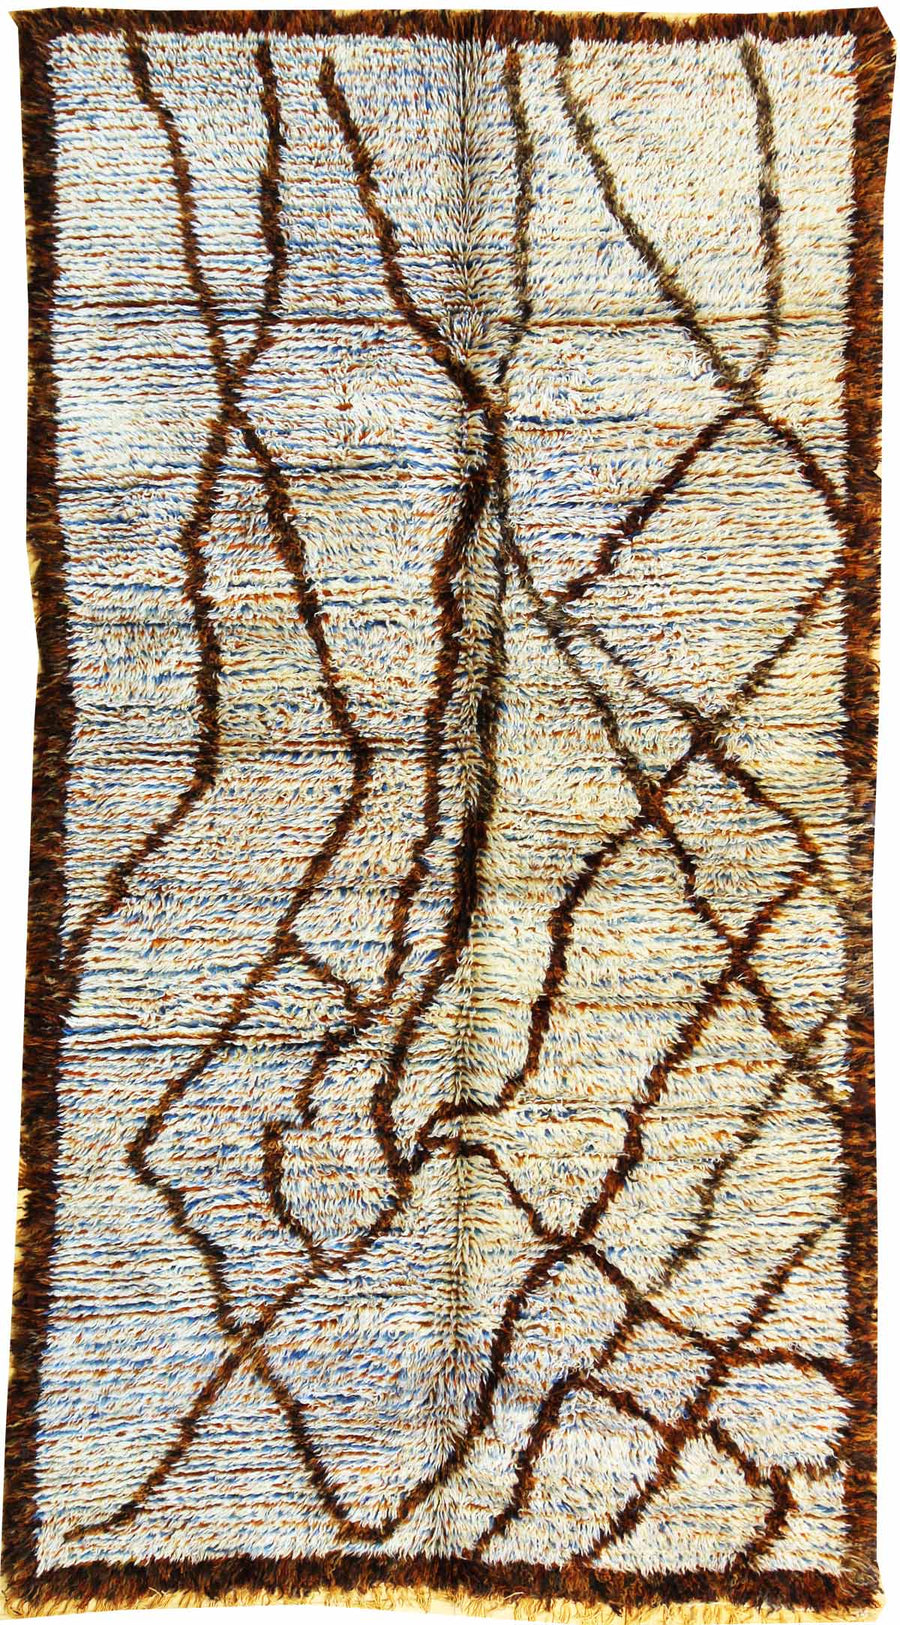 BENI OURAINE HANDKNOTTED RUG, J38330